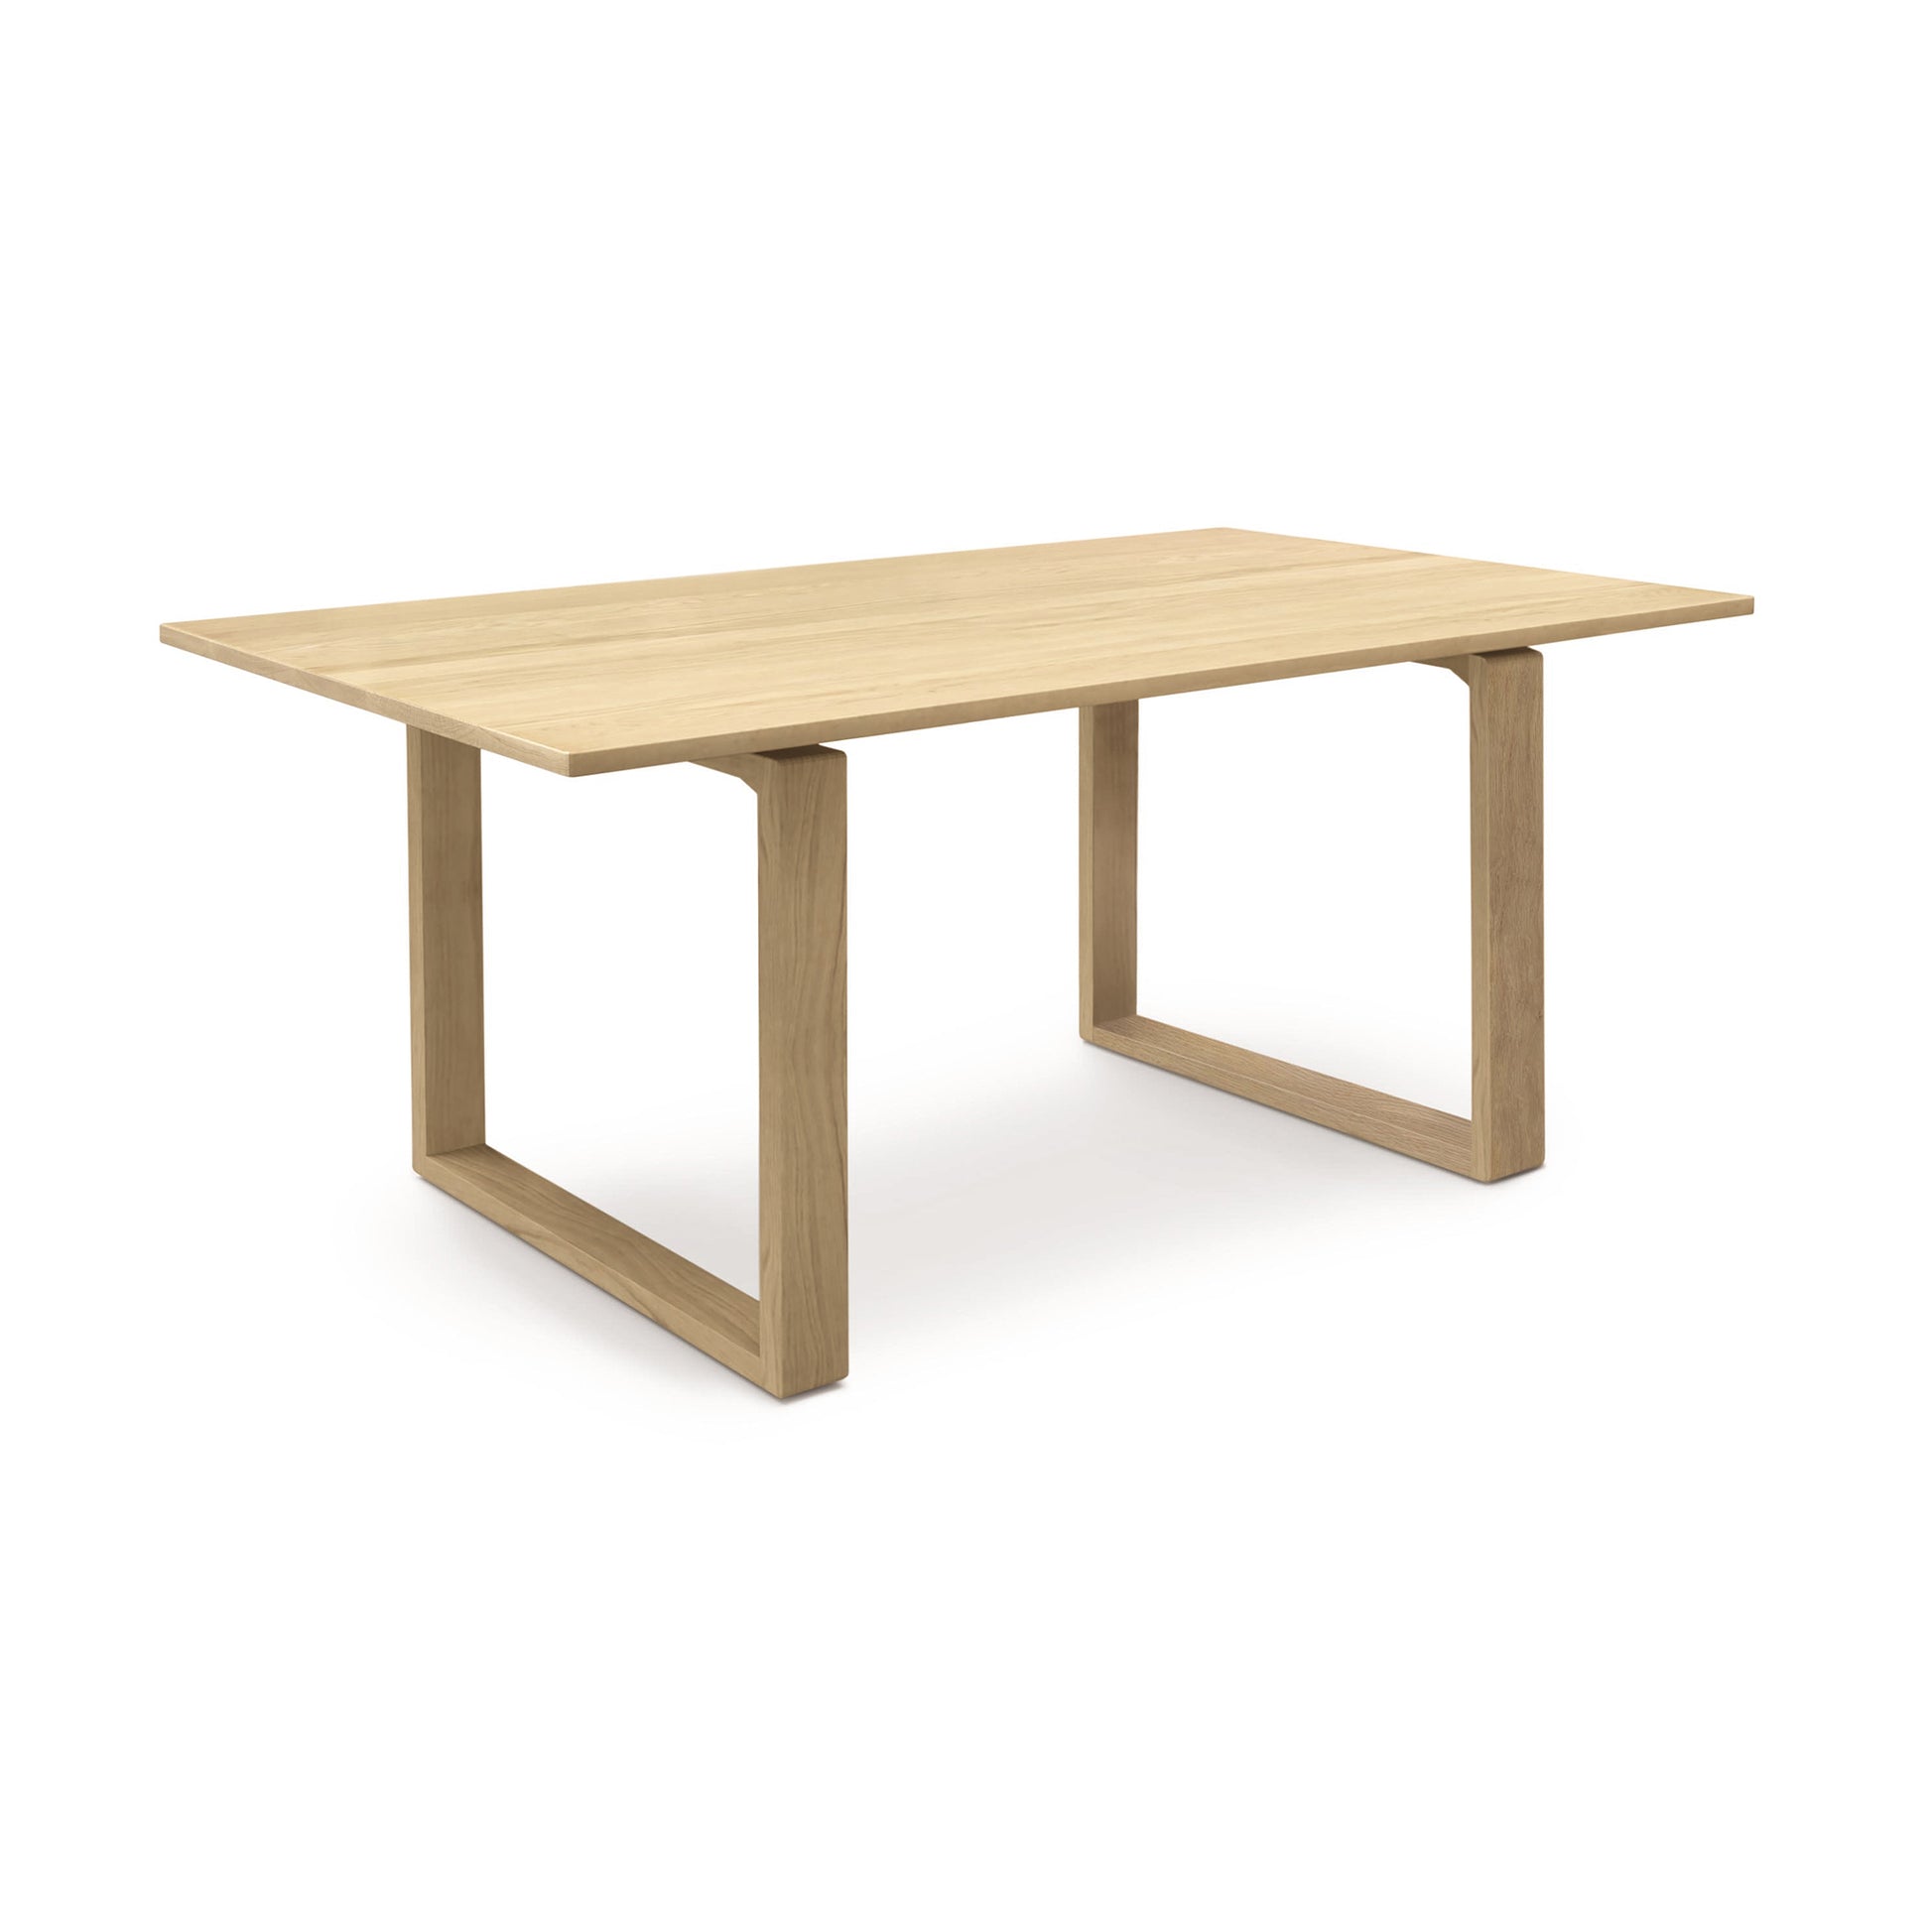 A wooden dining table with a rectangular top and two wide, squared legs, displayed against a white background. This Copeland Furniture Iso Oak Solid Top Dining Table is crafted from sustainably sourced North American hardwoods.